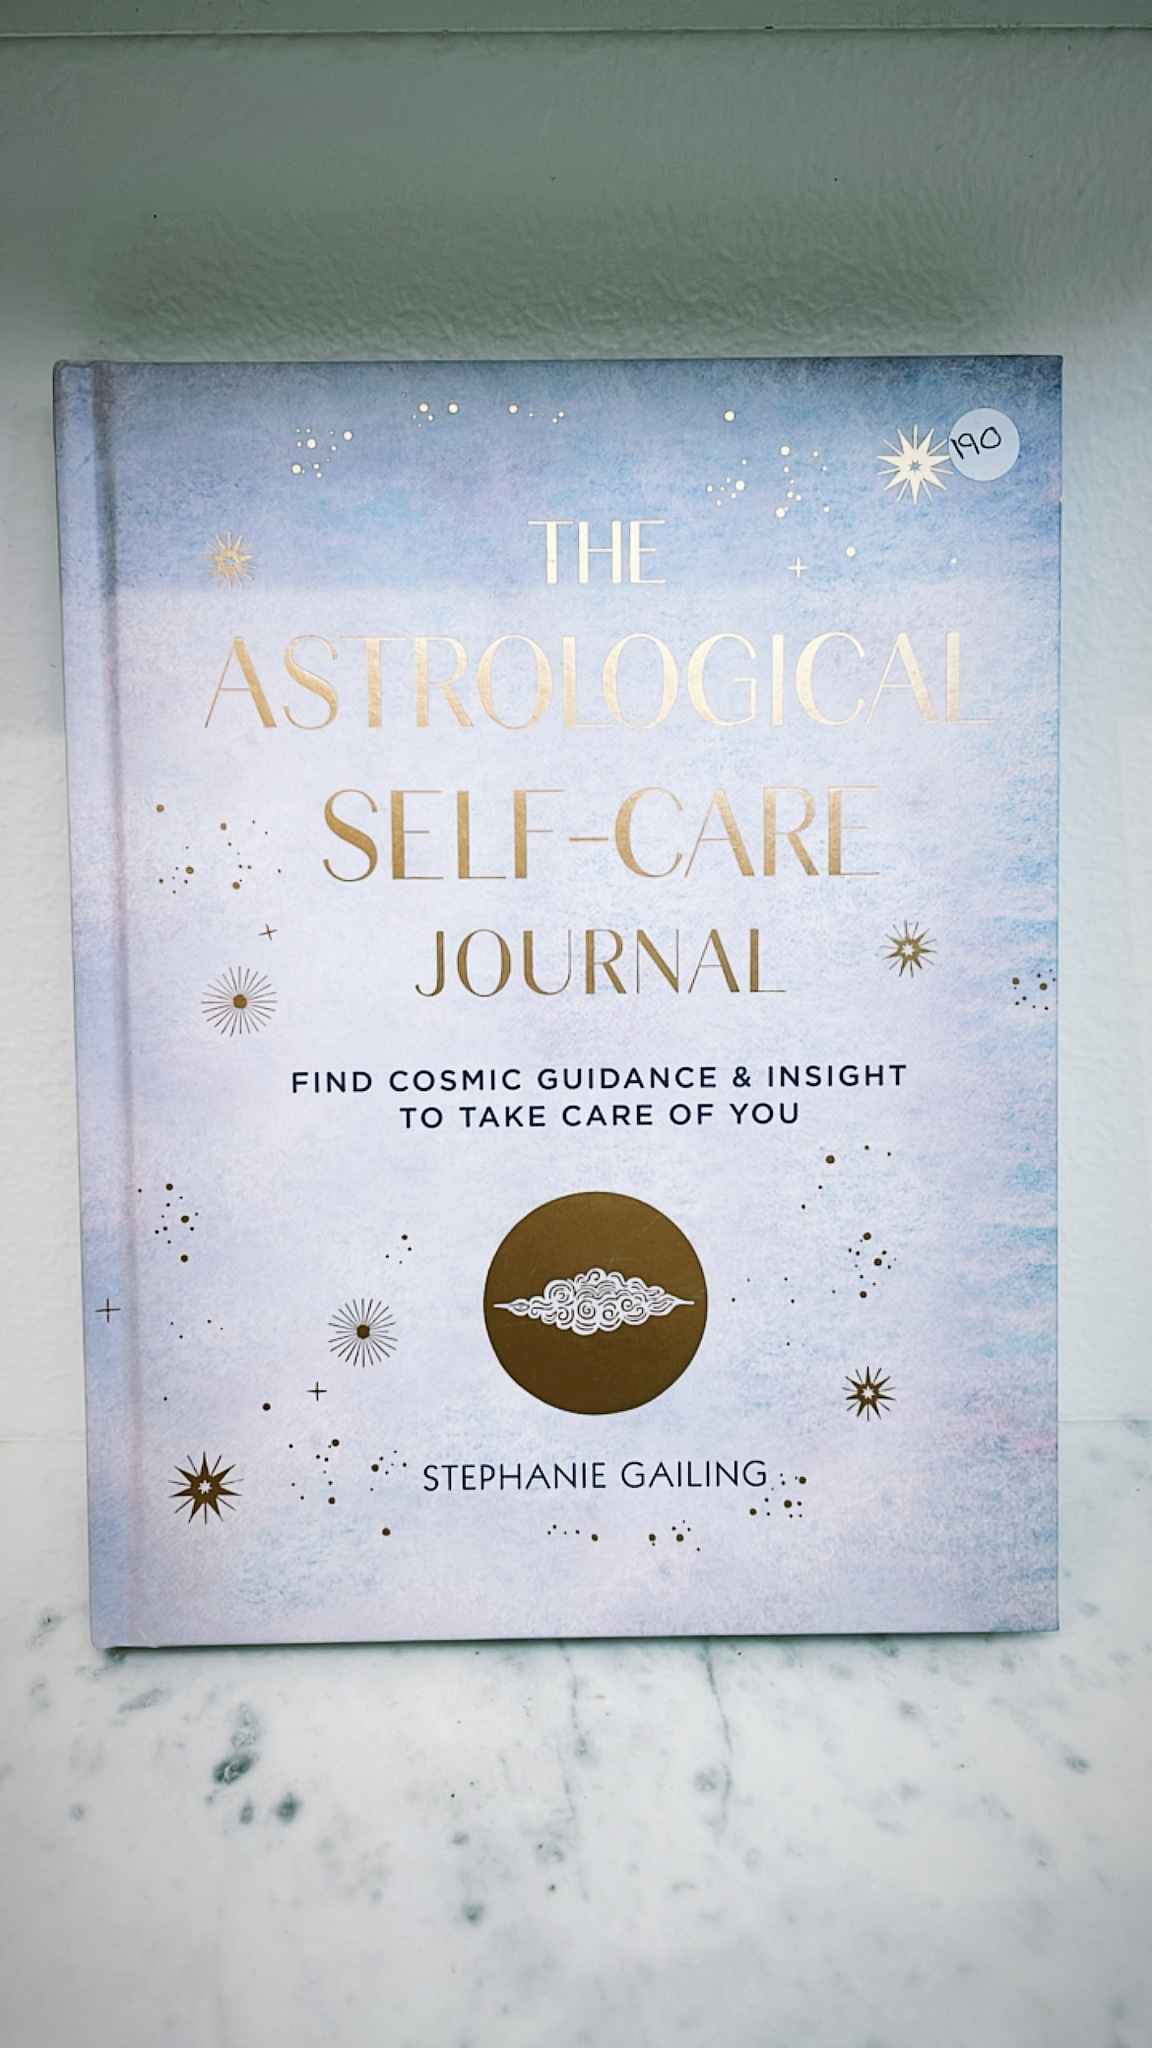 The Astrological Self-Care Journal.